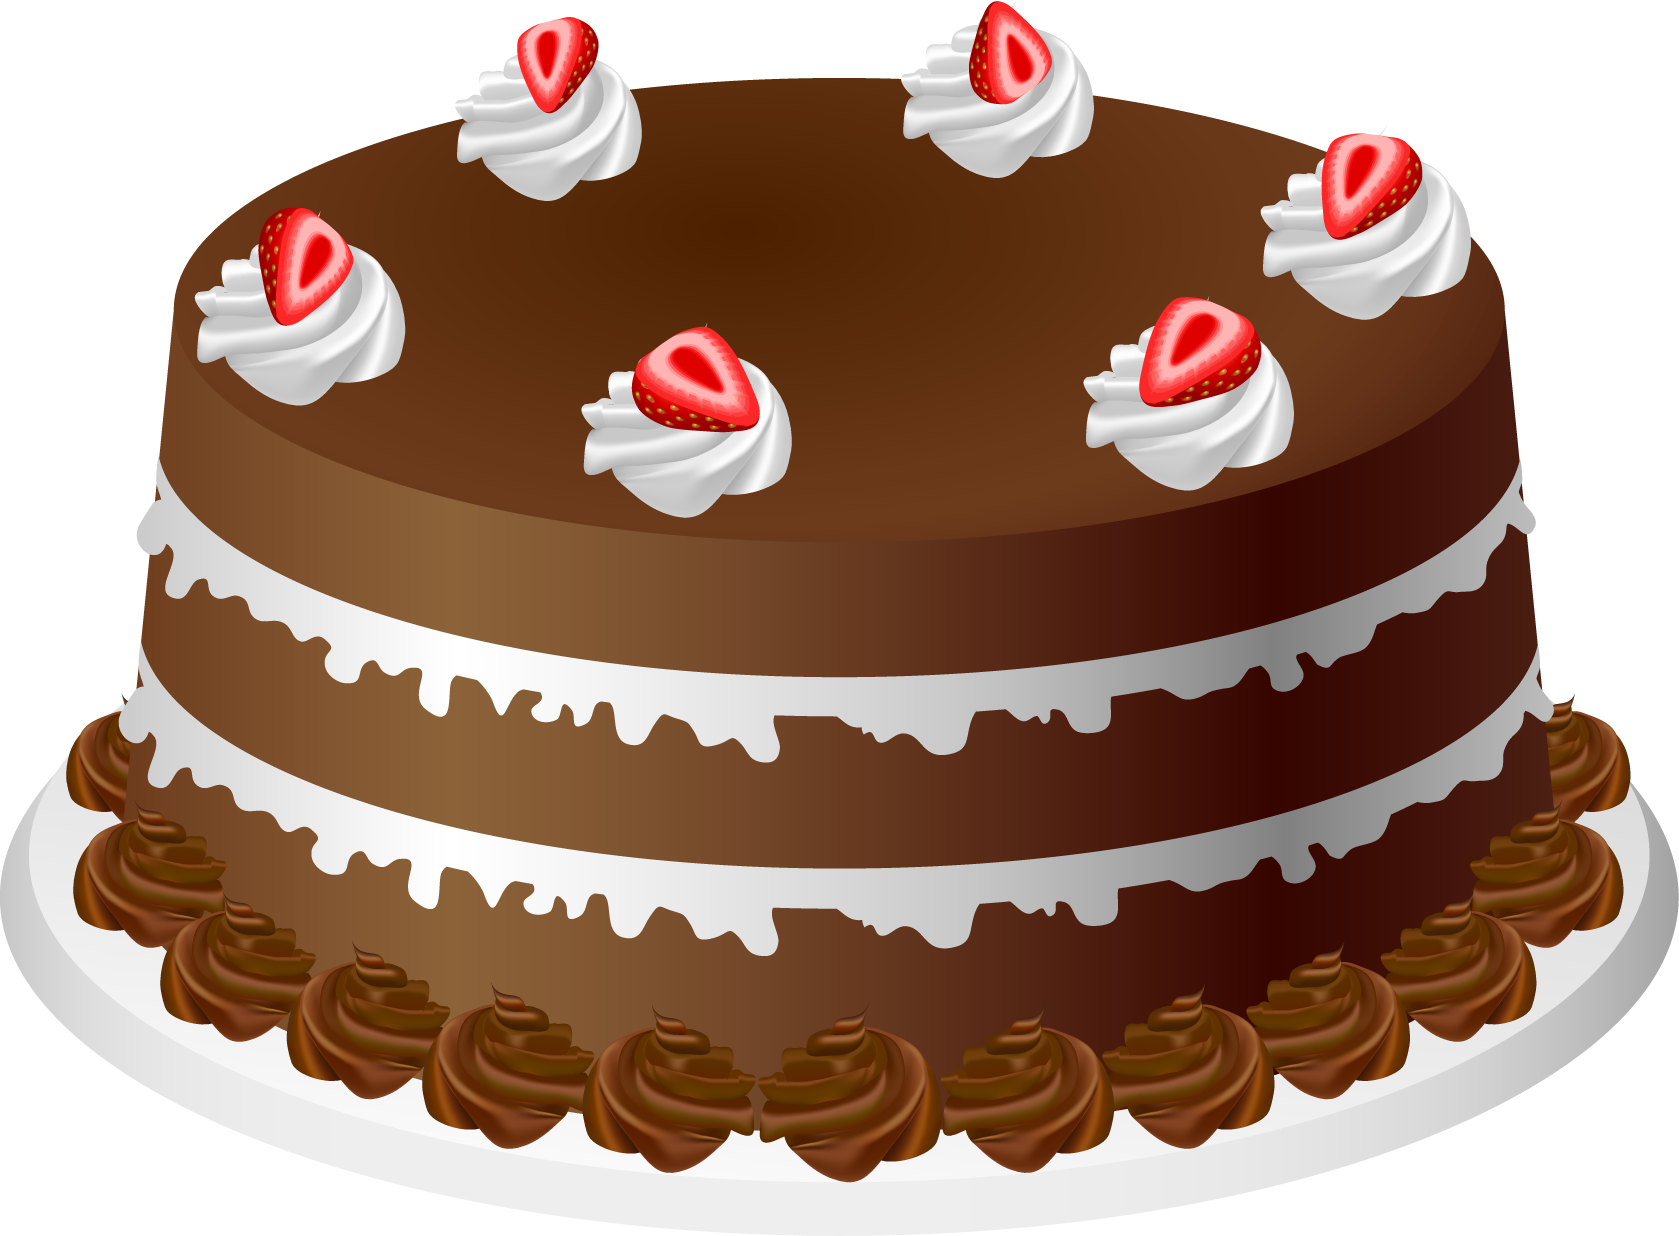 Birthday Cake With Candles Illustration. Flat Style. Royalty Free SVG,  Cliparts, Vectors, and Stock Illustration. Image 34100987.